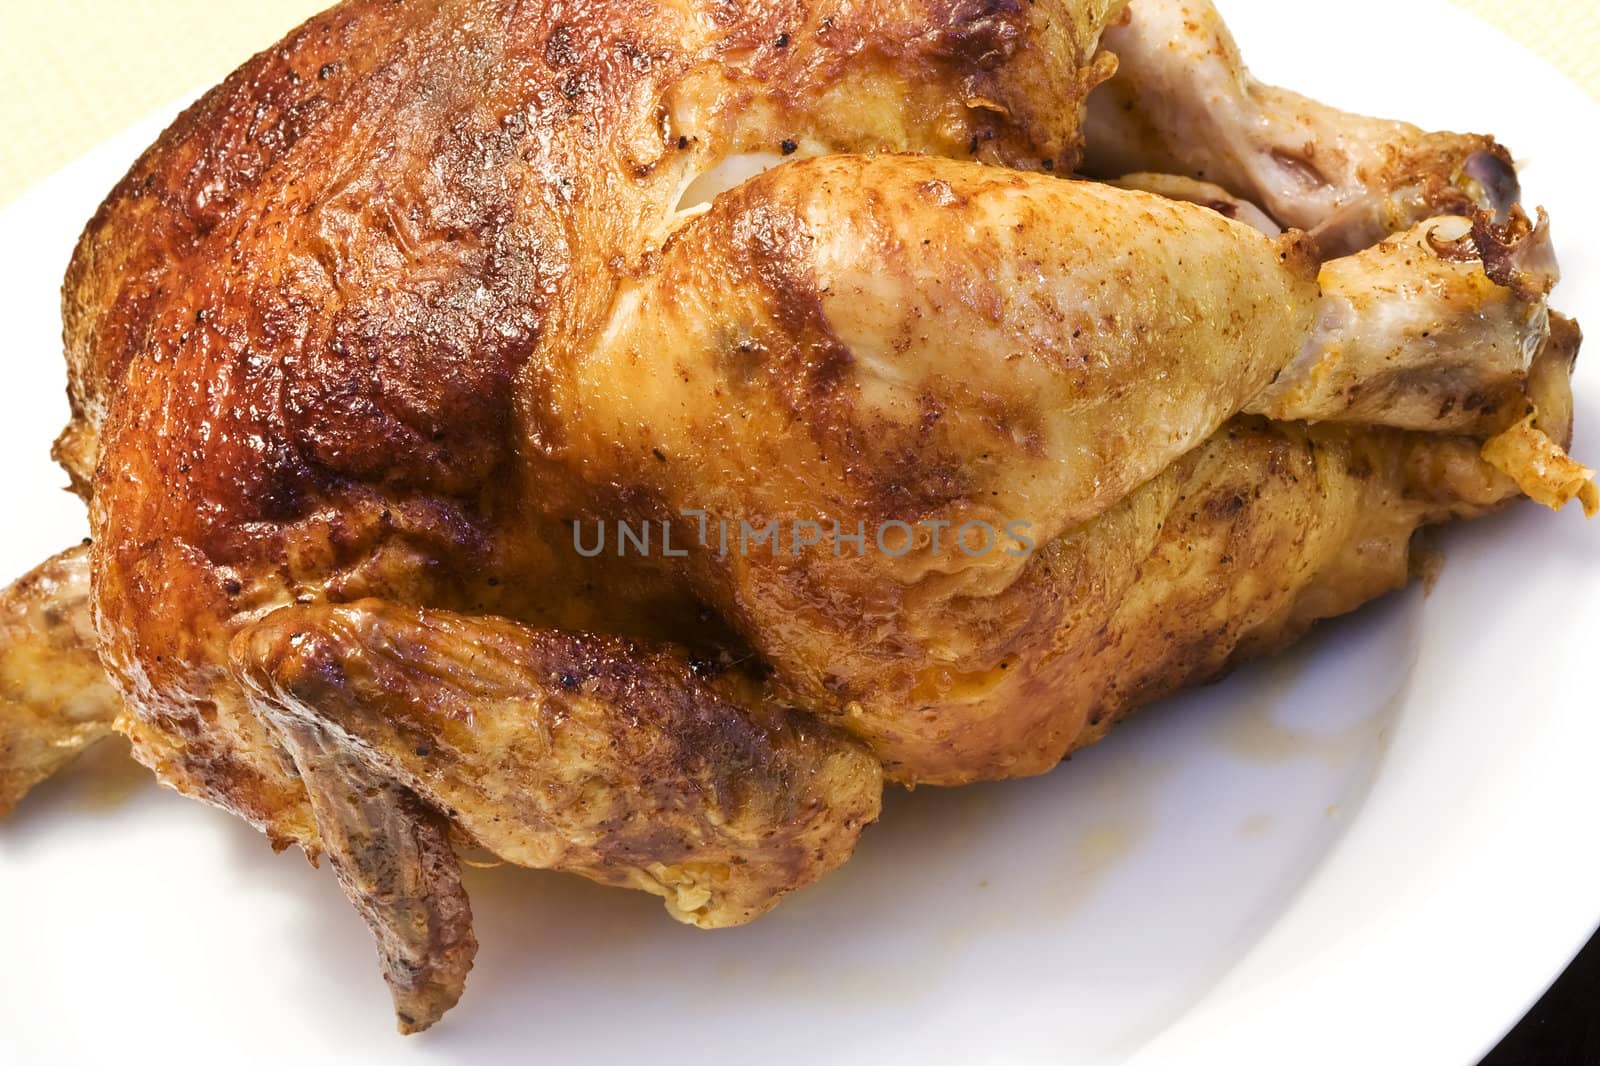 roasted chicken by snokid